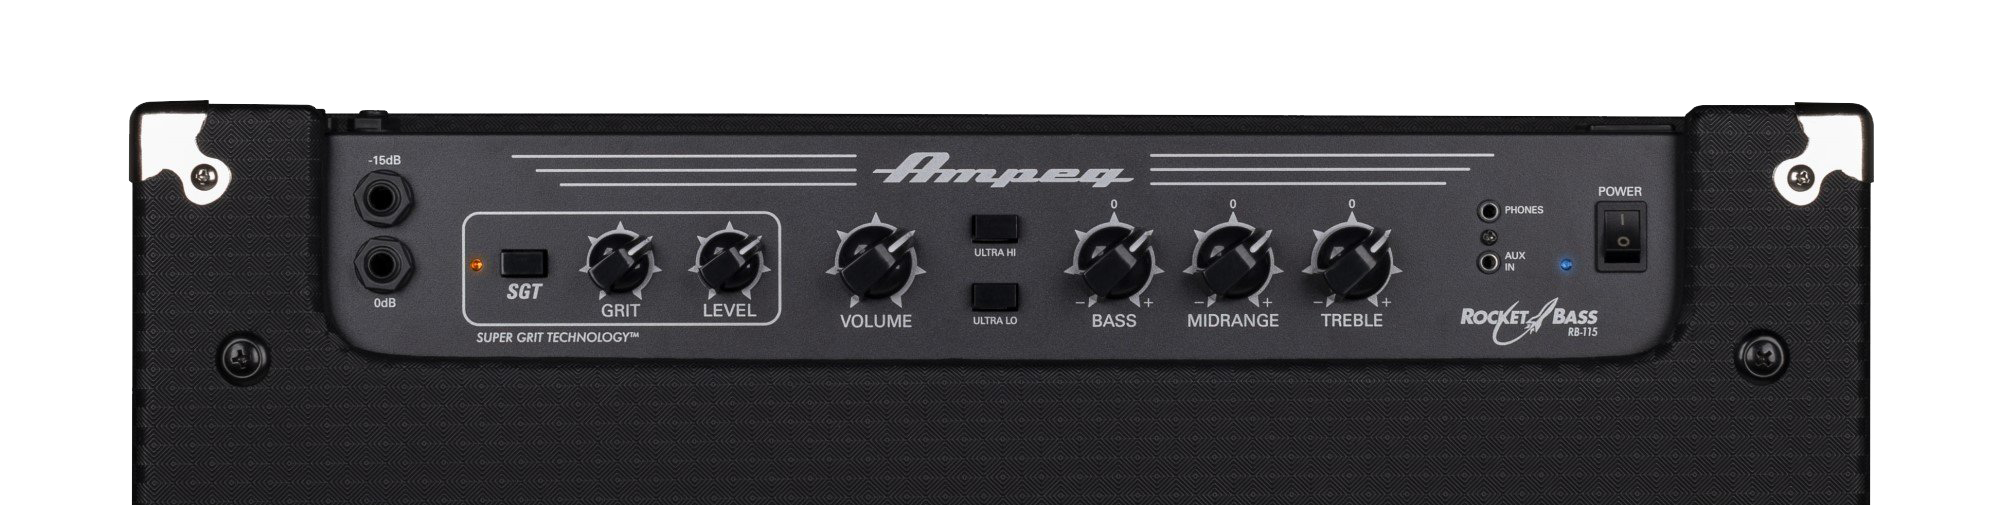 ampeg rb-115 bass combo amp specifications